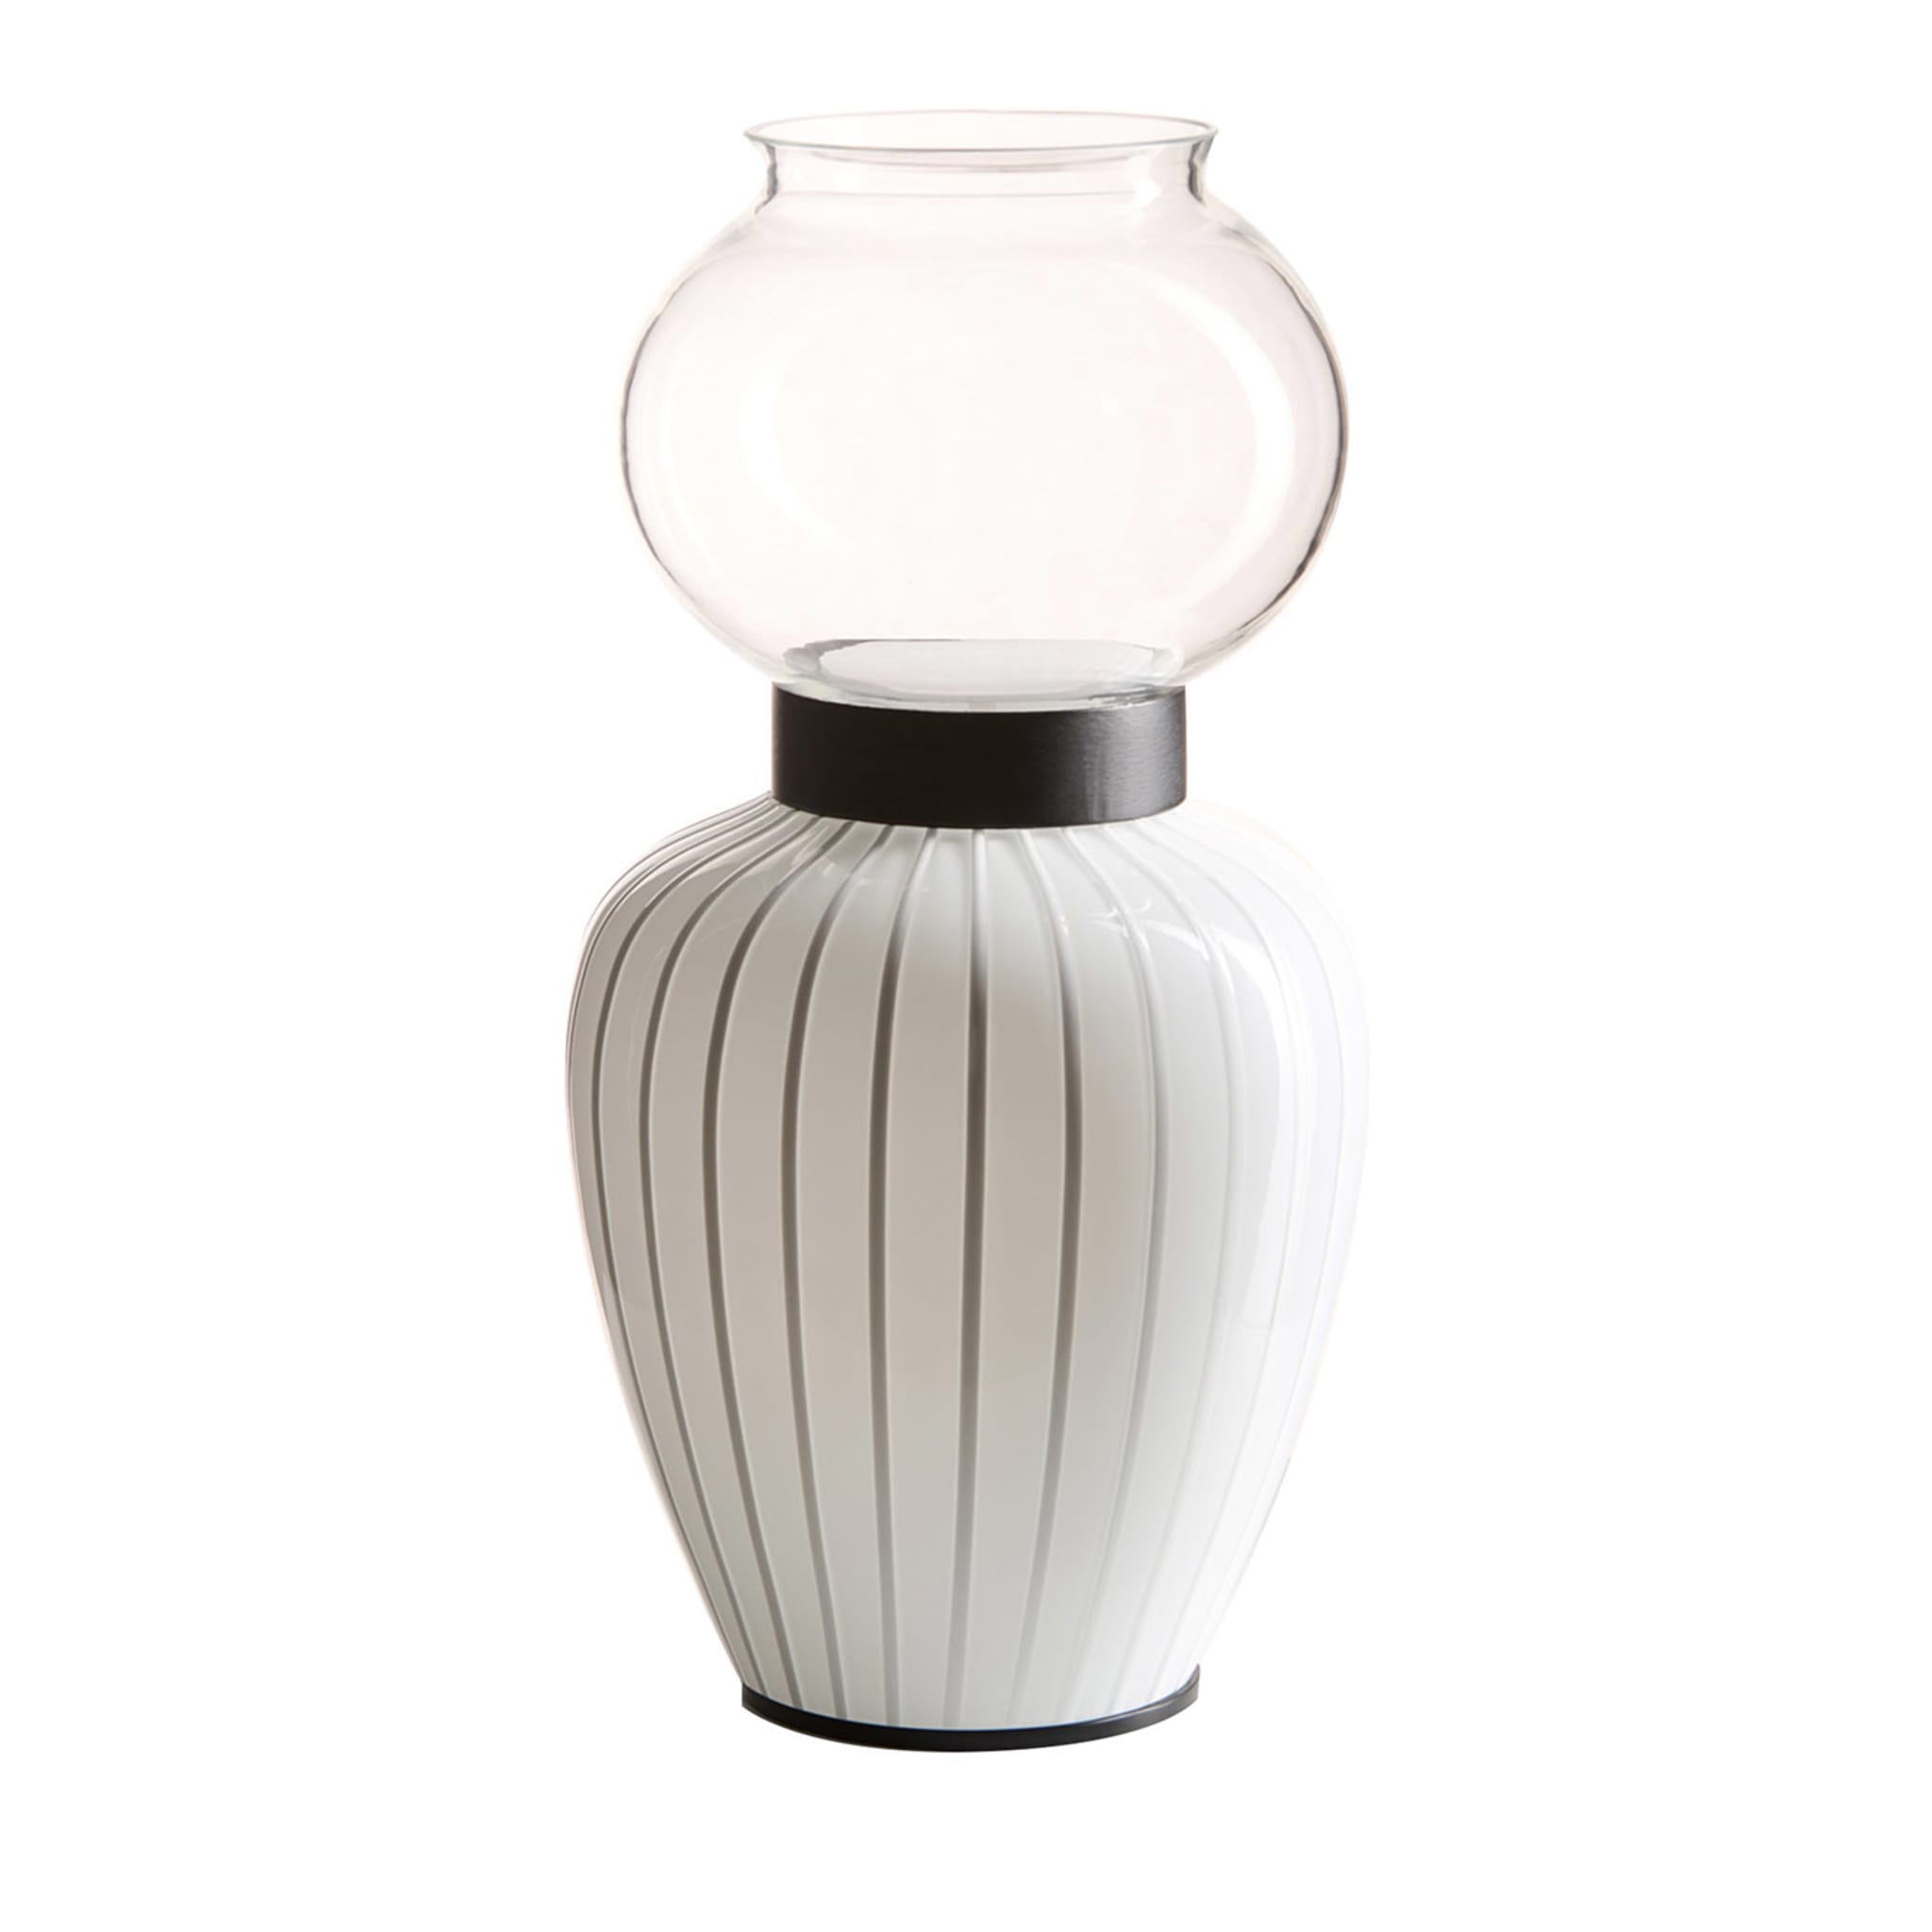 Layla White Striped Table Lamp by Serena Confalonieri - Main view